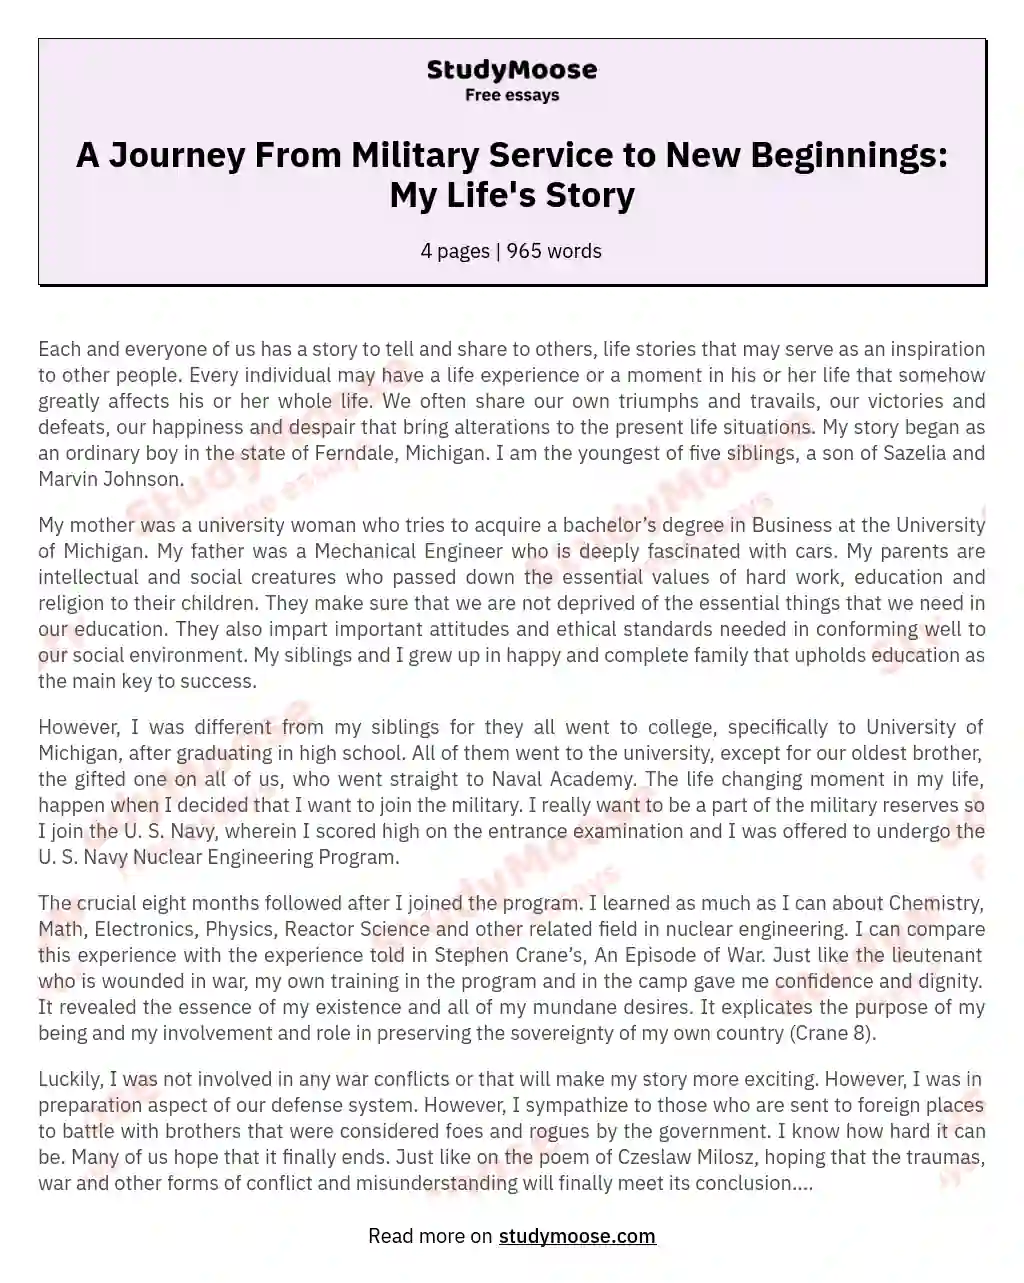 A Journey From Military Service to New Beginnings: My Life's Story essay